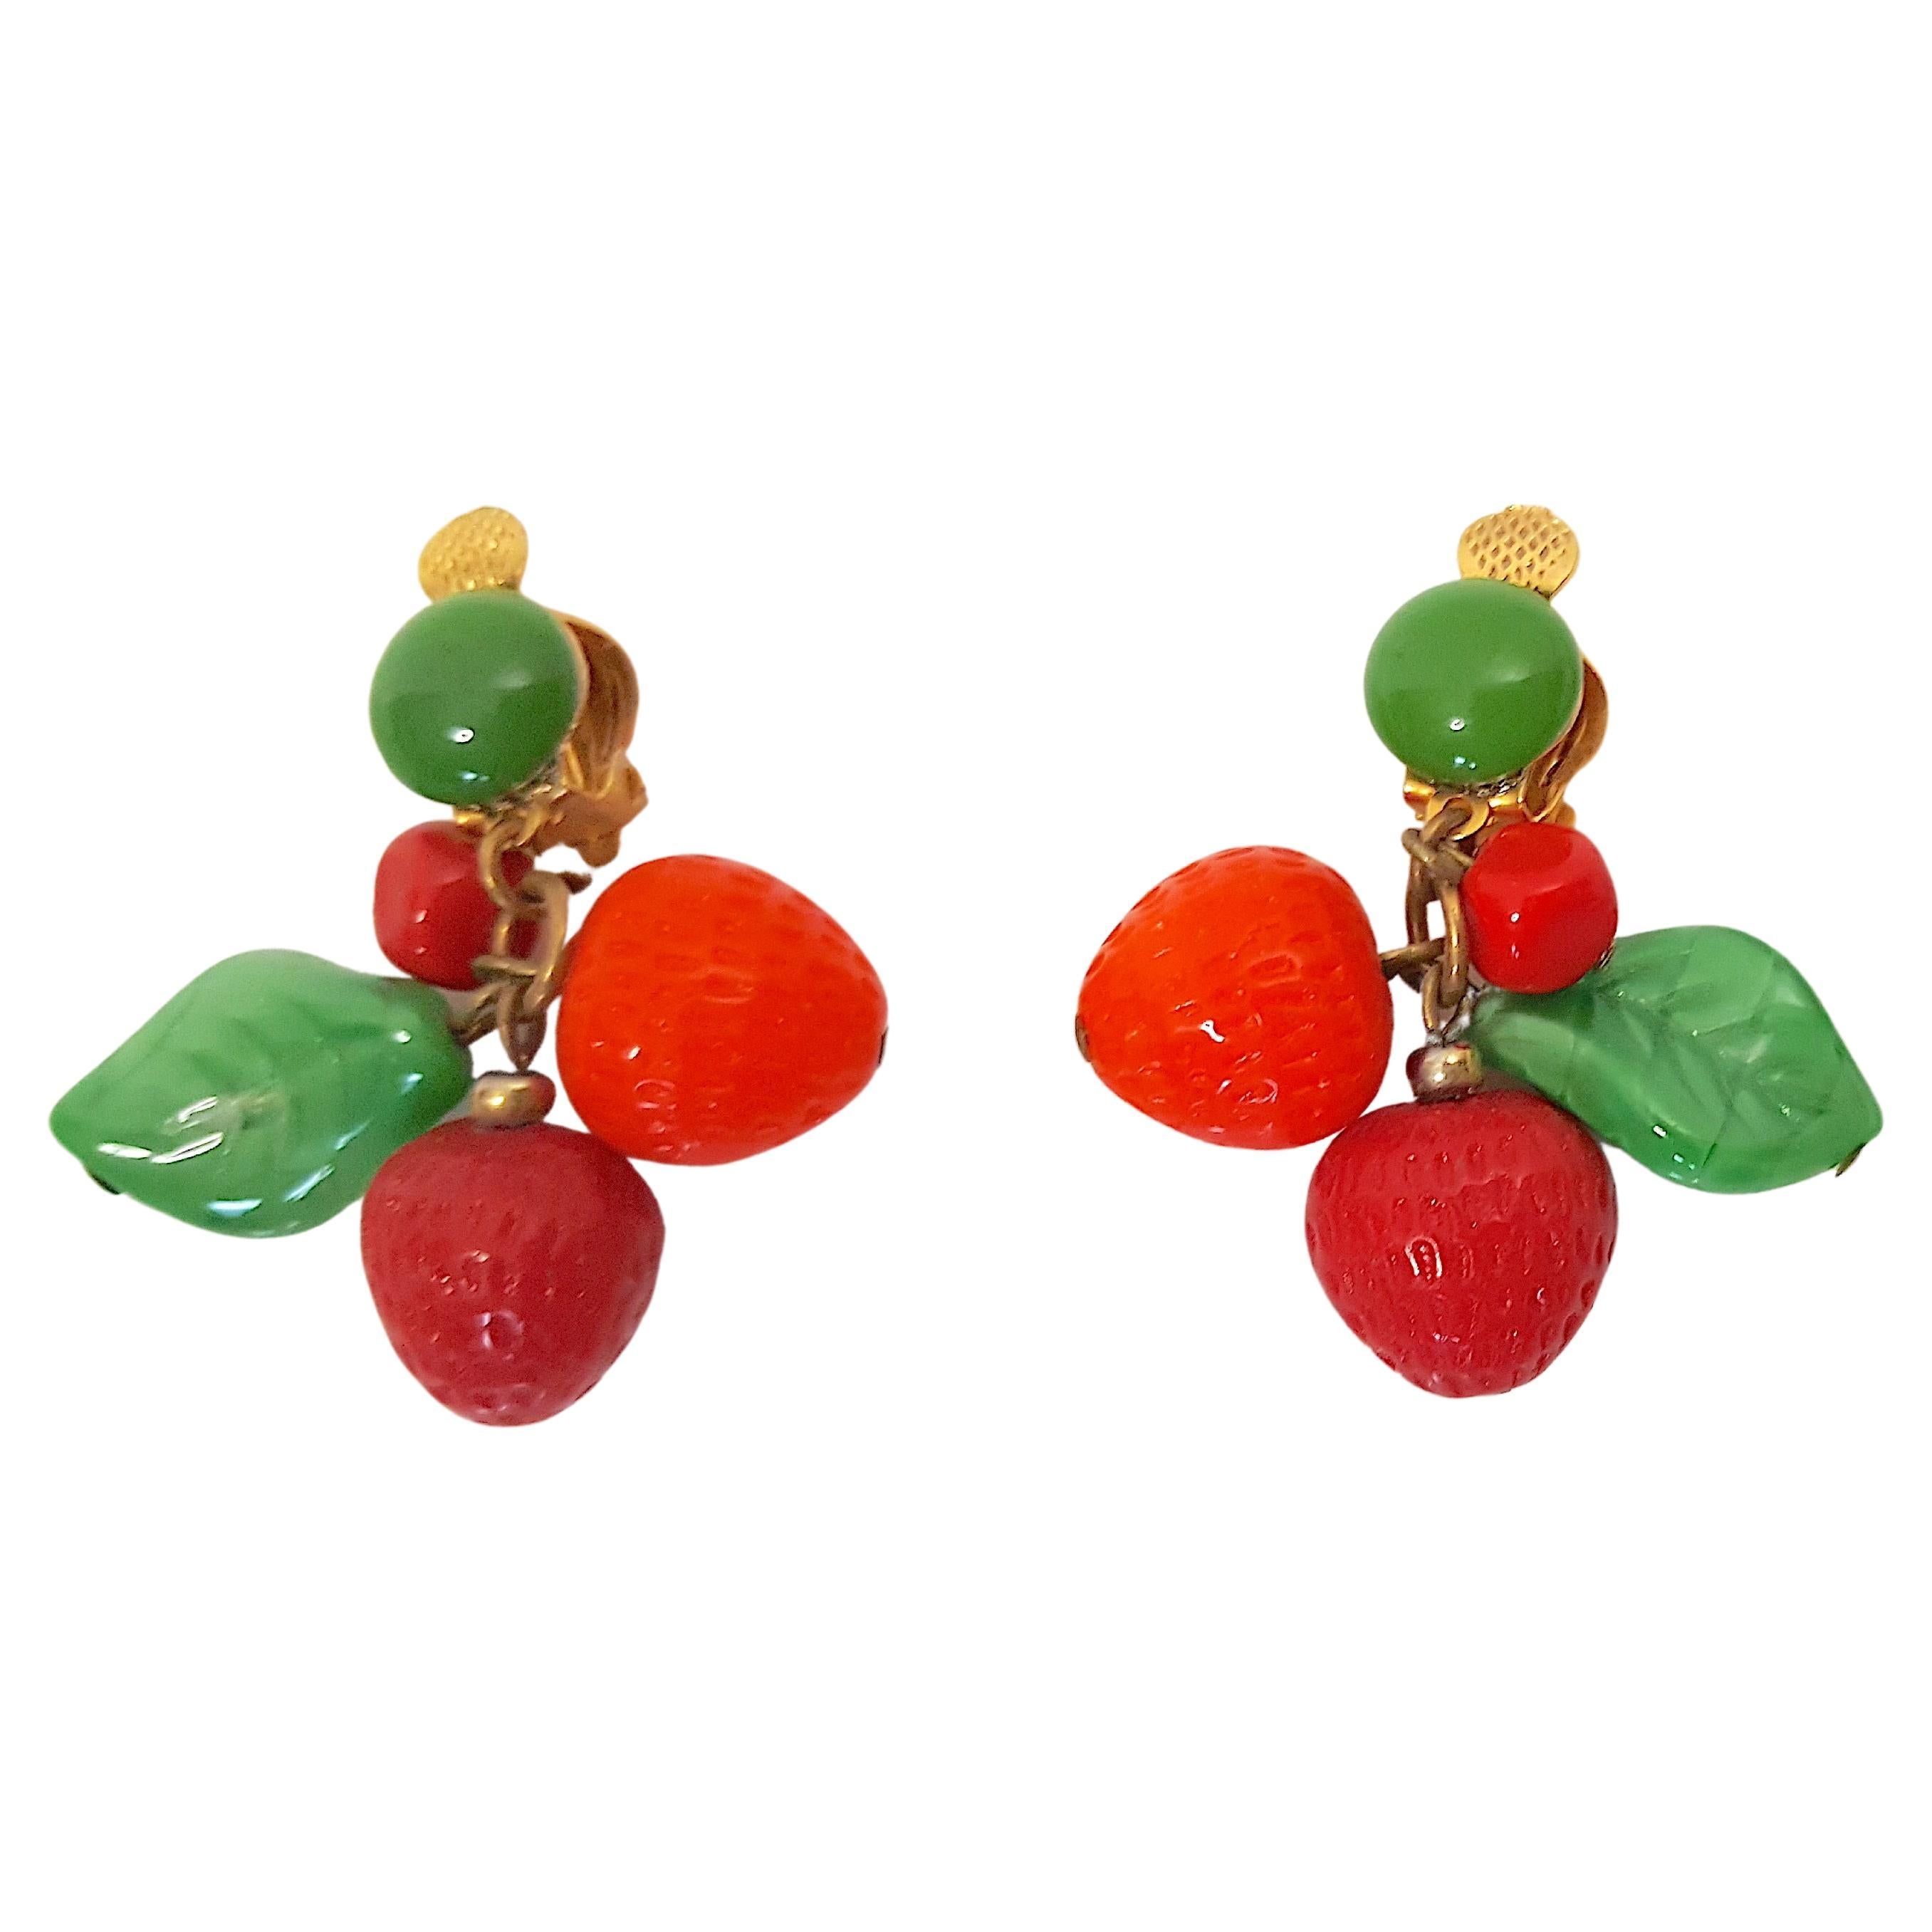 These antique early-20th-Century French carved lampwork glass bead earrings depict berries and leaves. On each earring, this fruit salad dangles on a single ring that drops from a round convex green 